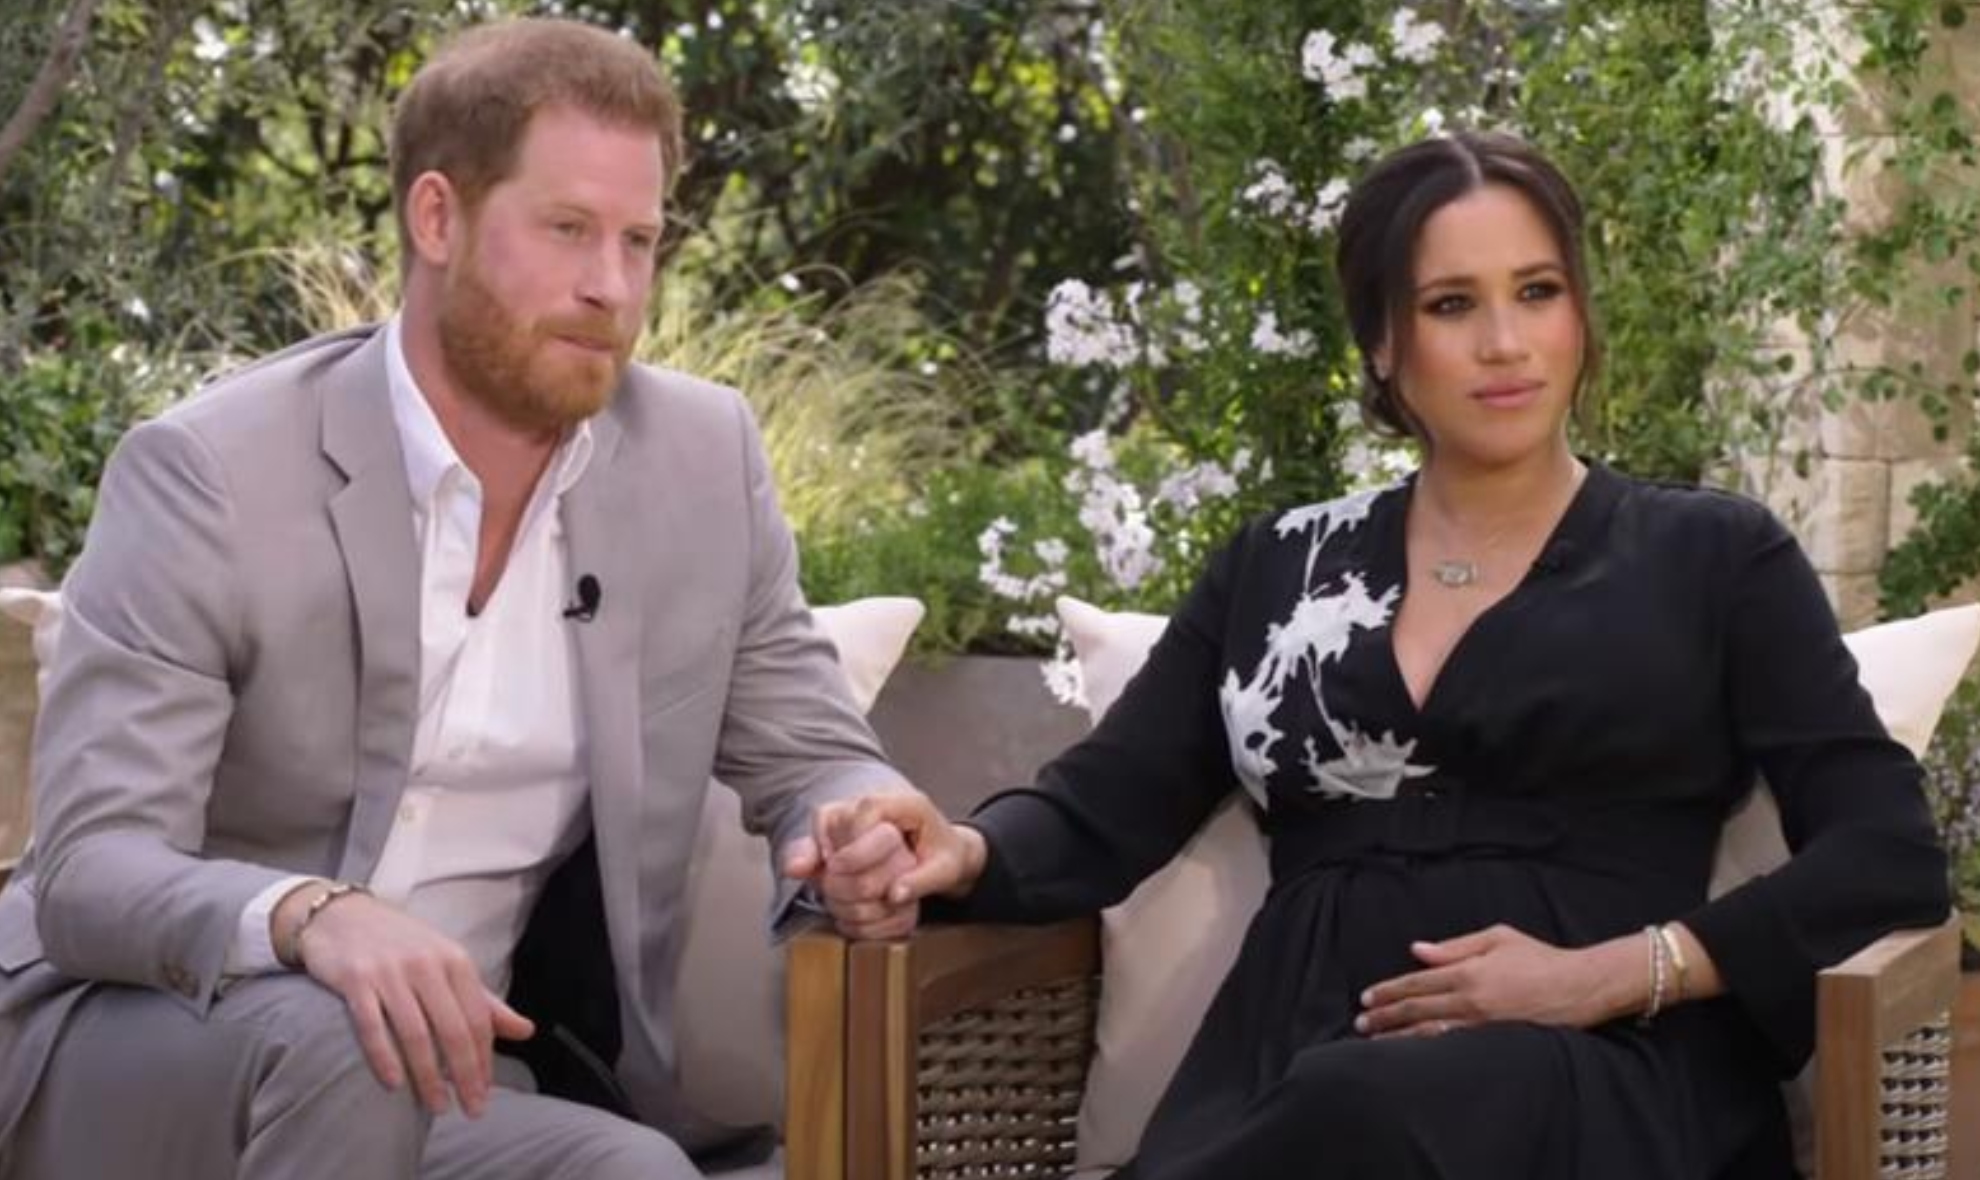 “No one from my family said anything”: The most explosive details to come from Harry & Meghan’s tell-all Oprah interview